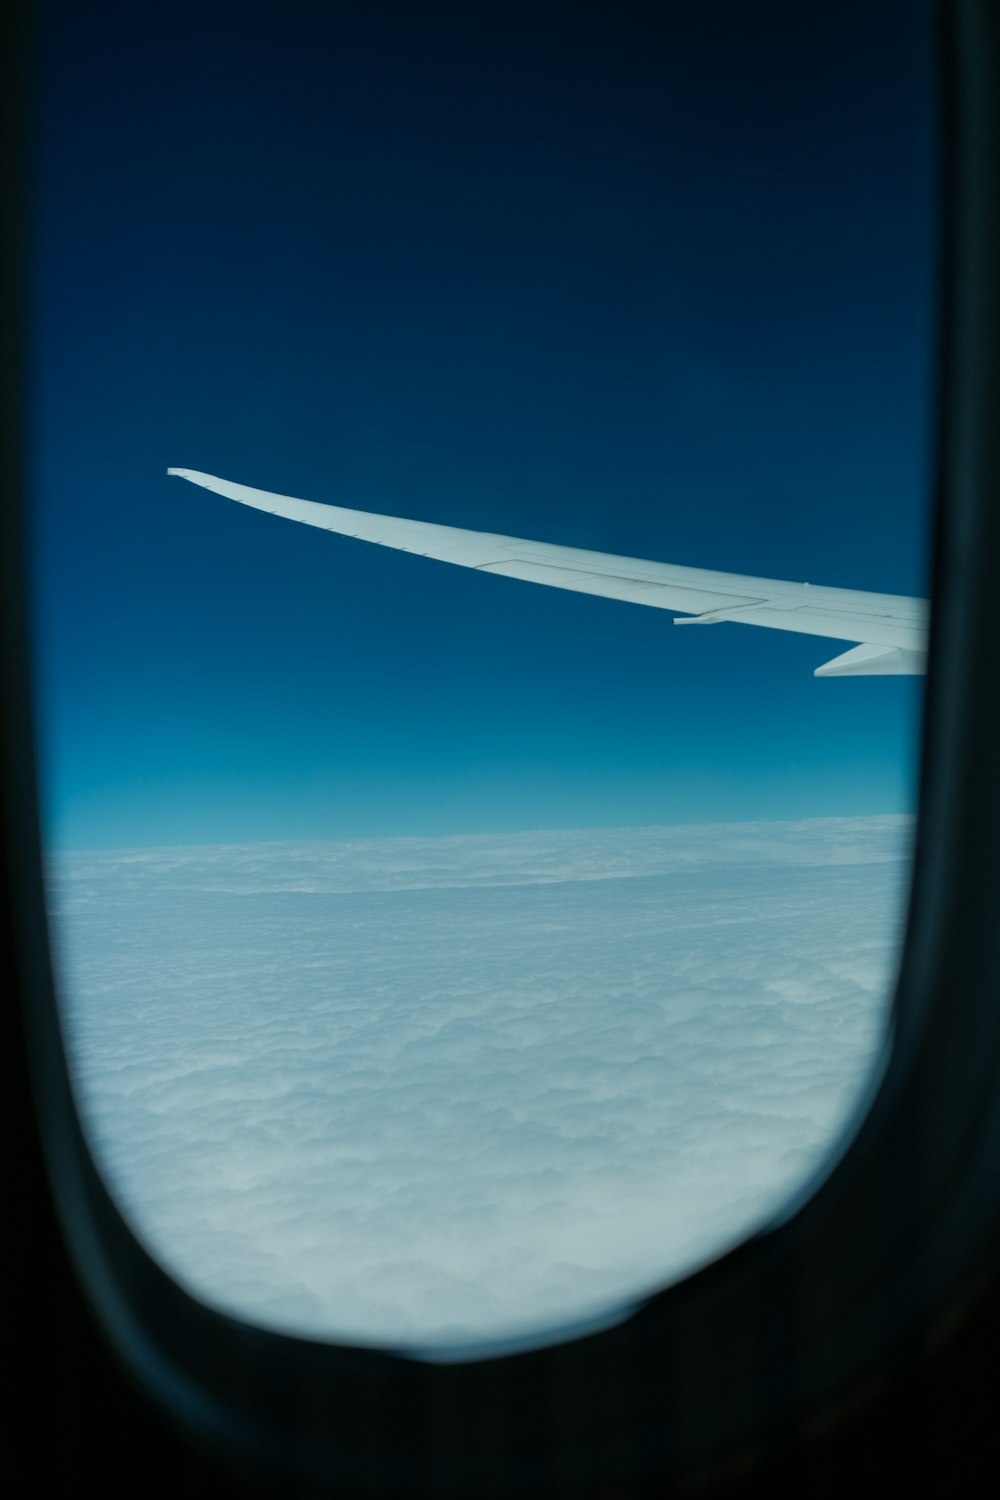 the wing of an airplane flying above the clouds